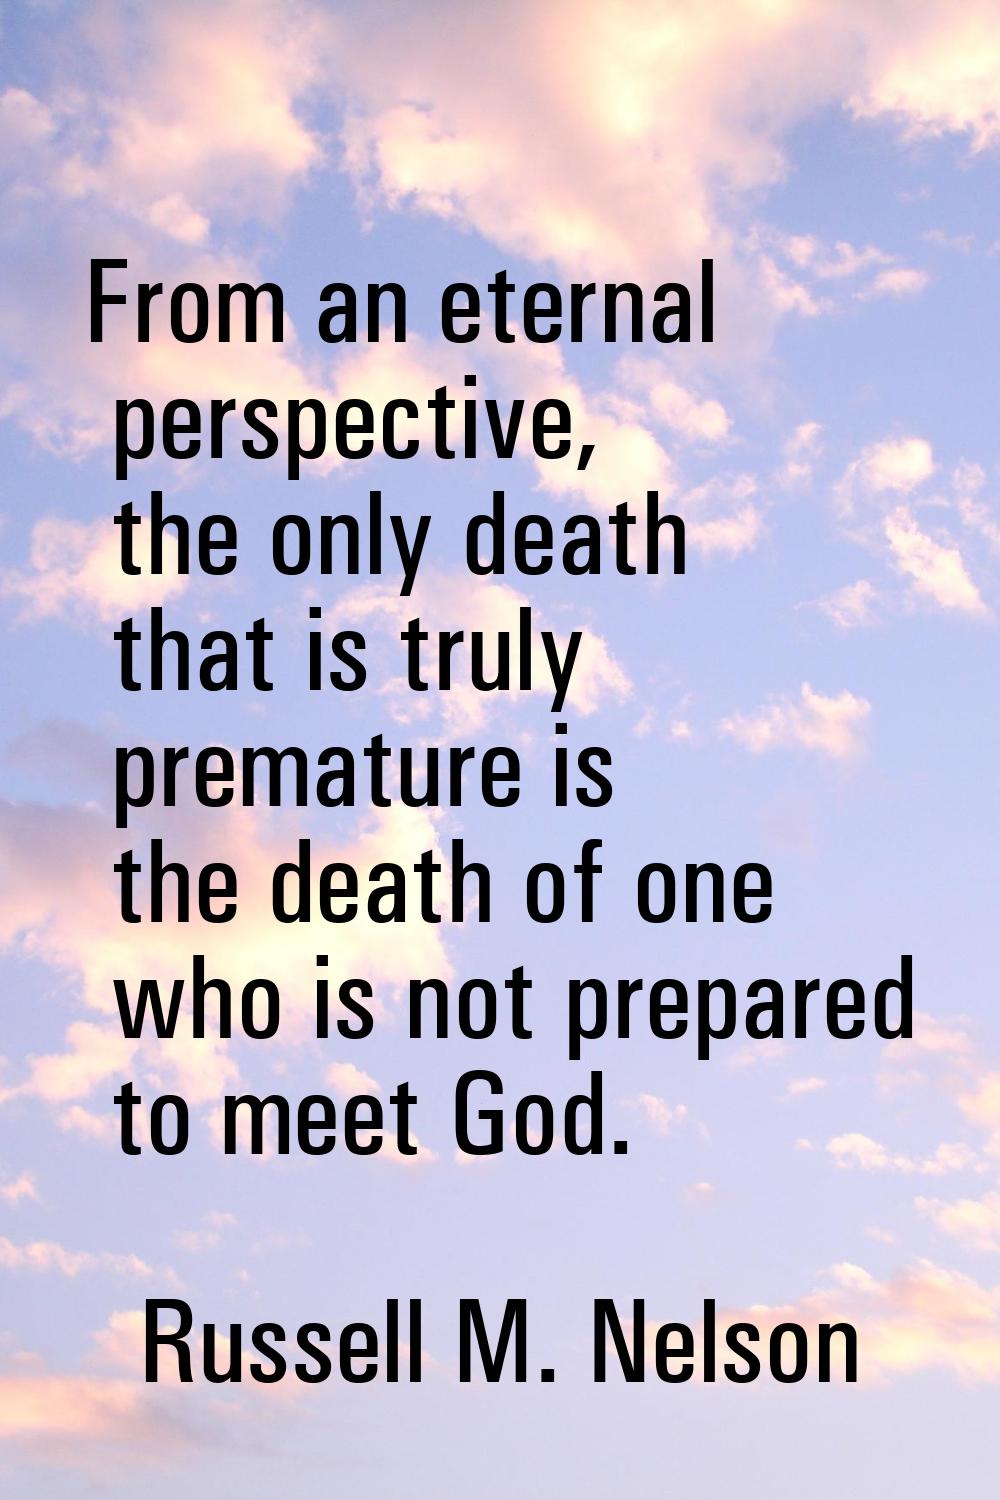 From an eternal perspective, the only death that is truly premature is the death of one who is not 